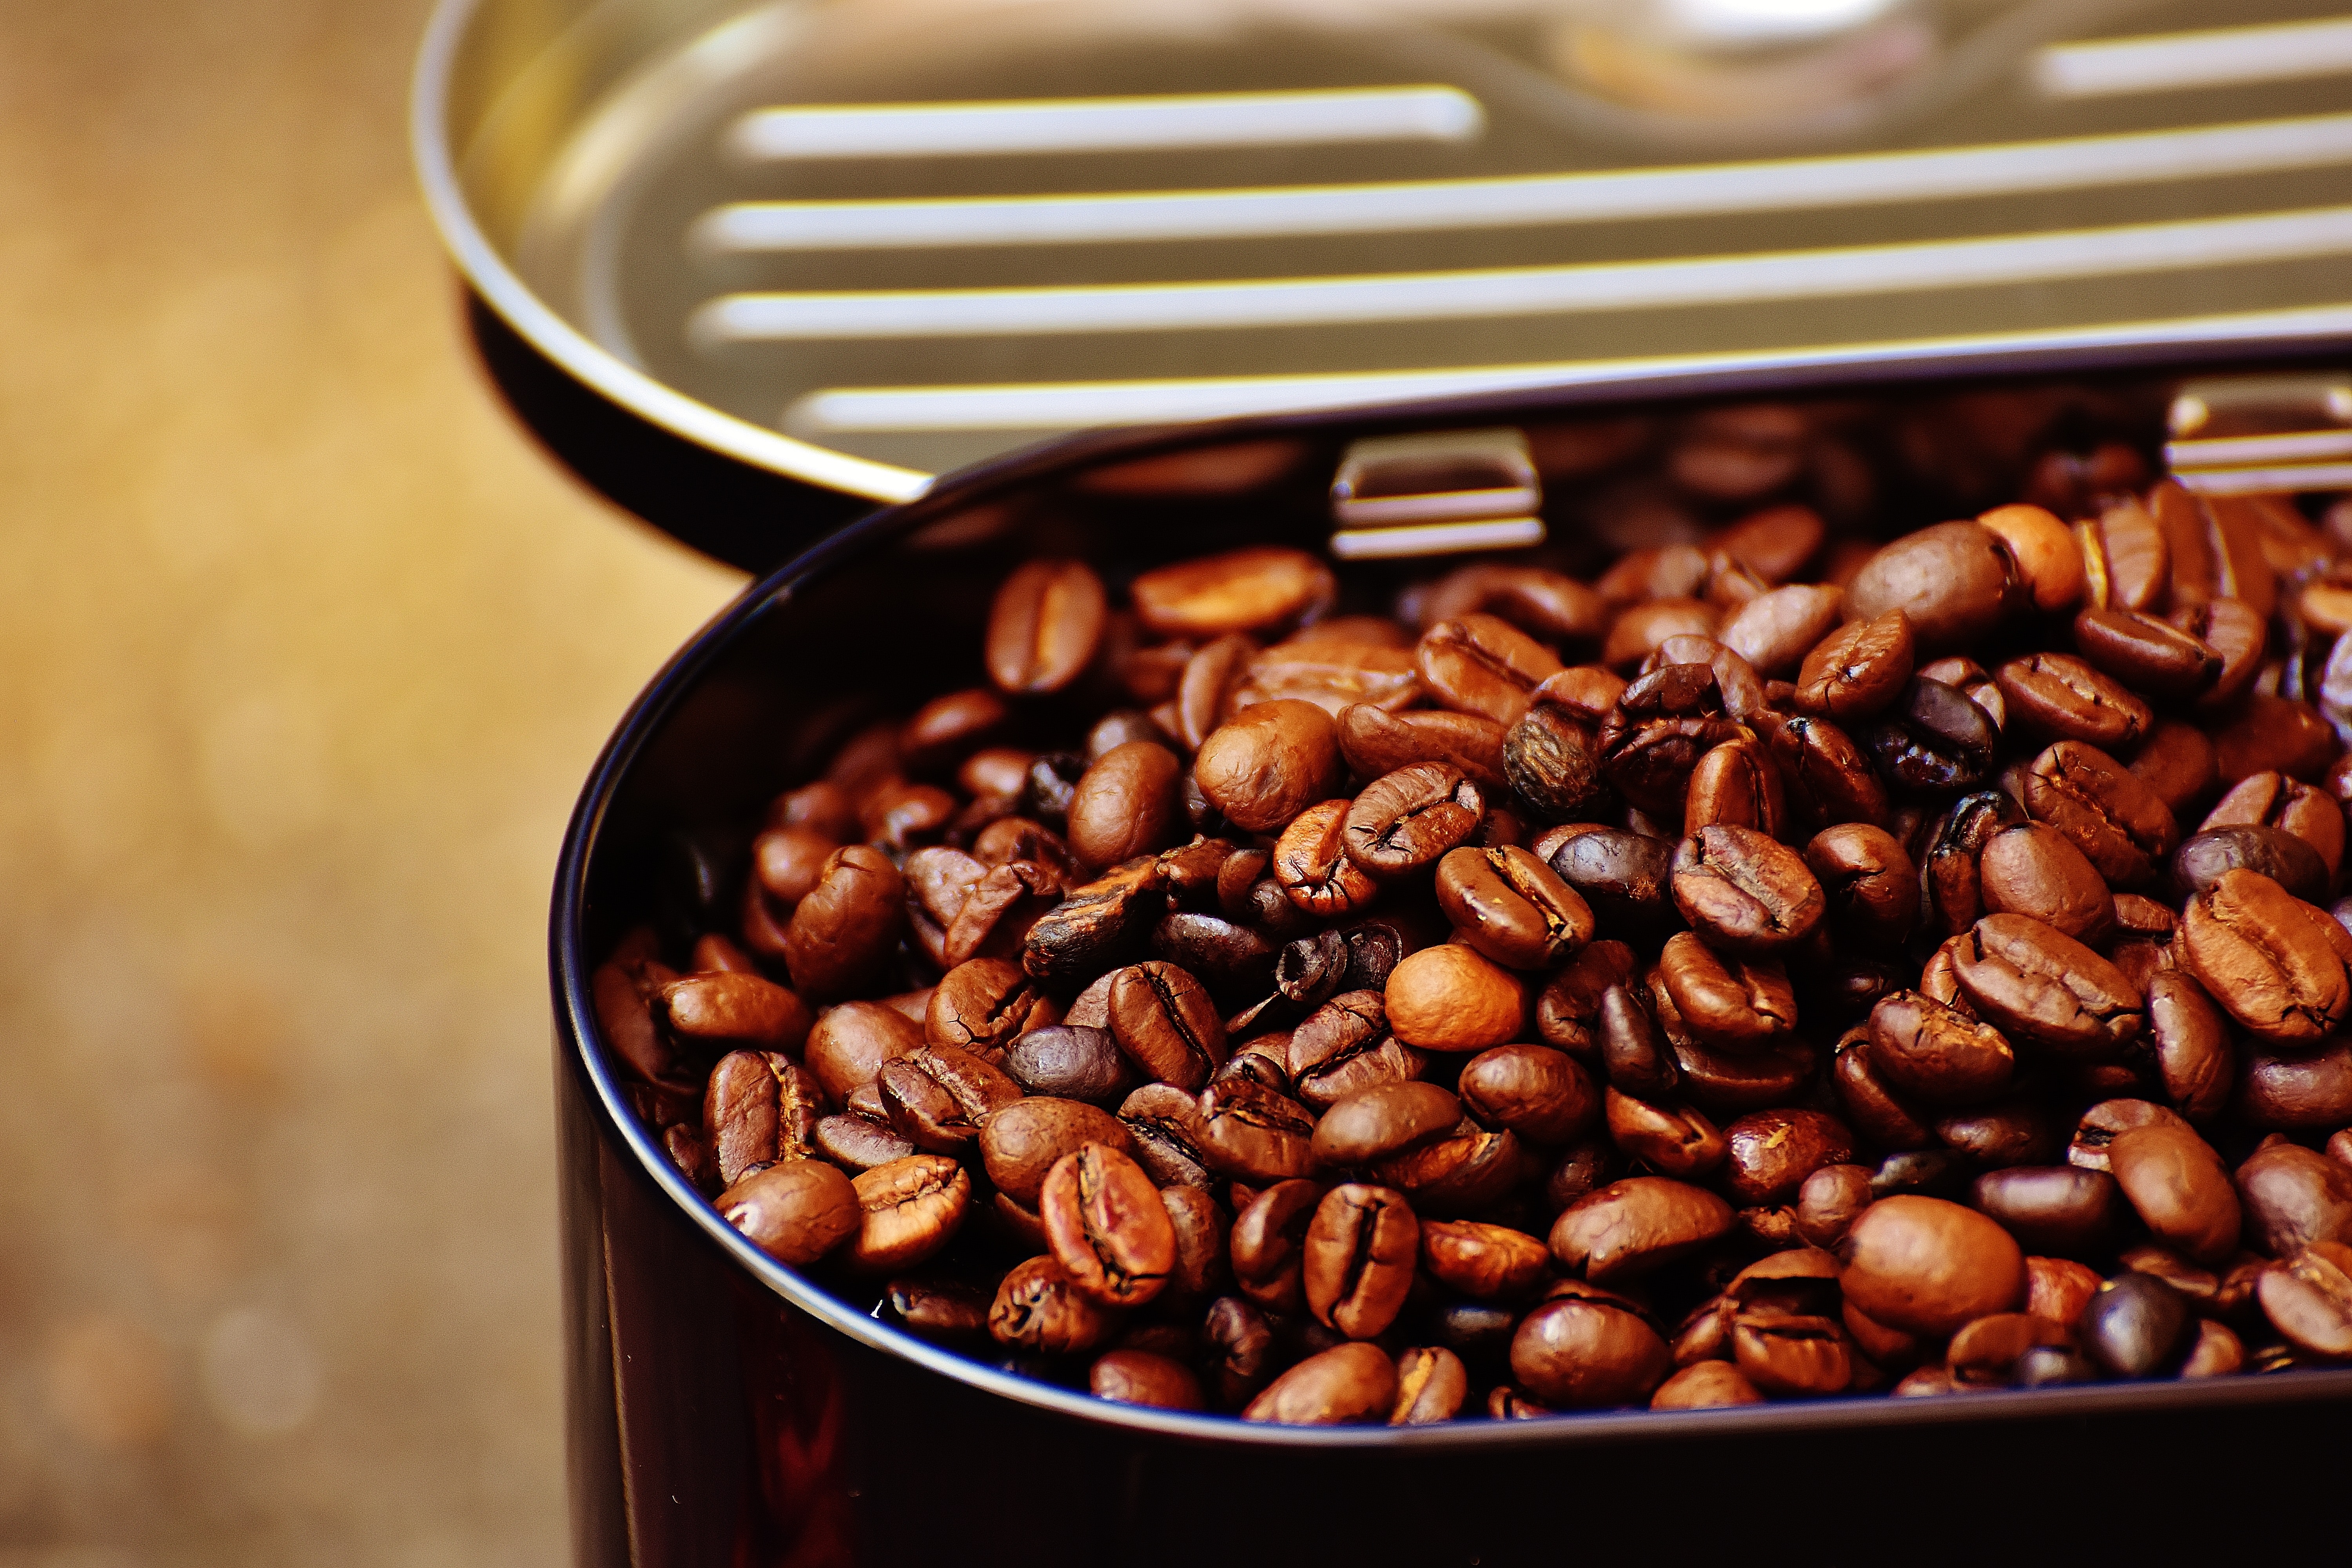 Roasted Coffee Beans, Aroma, Aromatic, Beans, Blur, HQ Photo